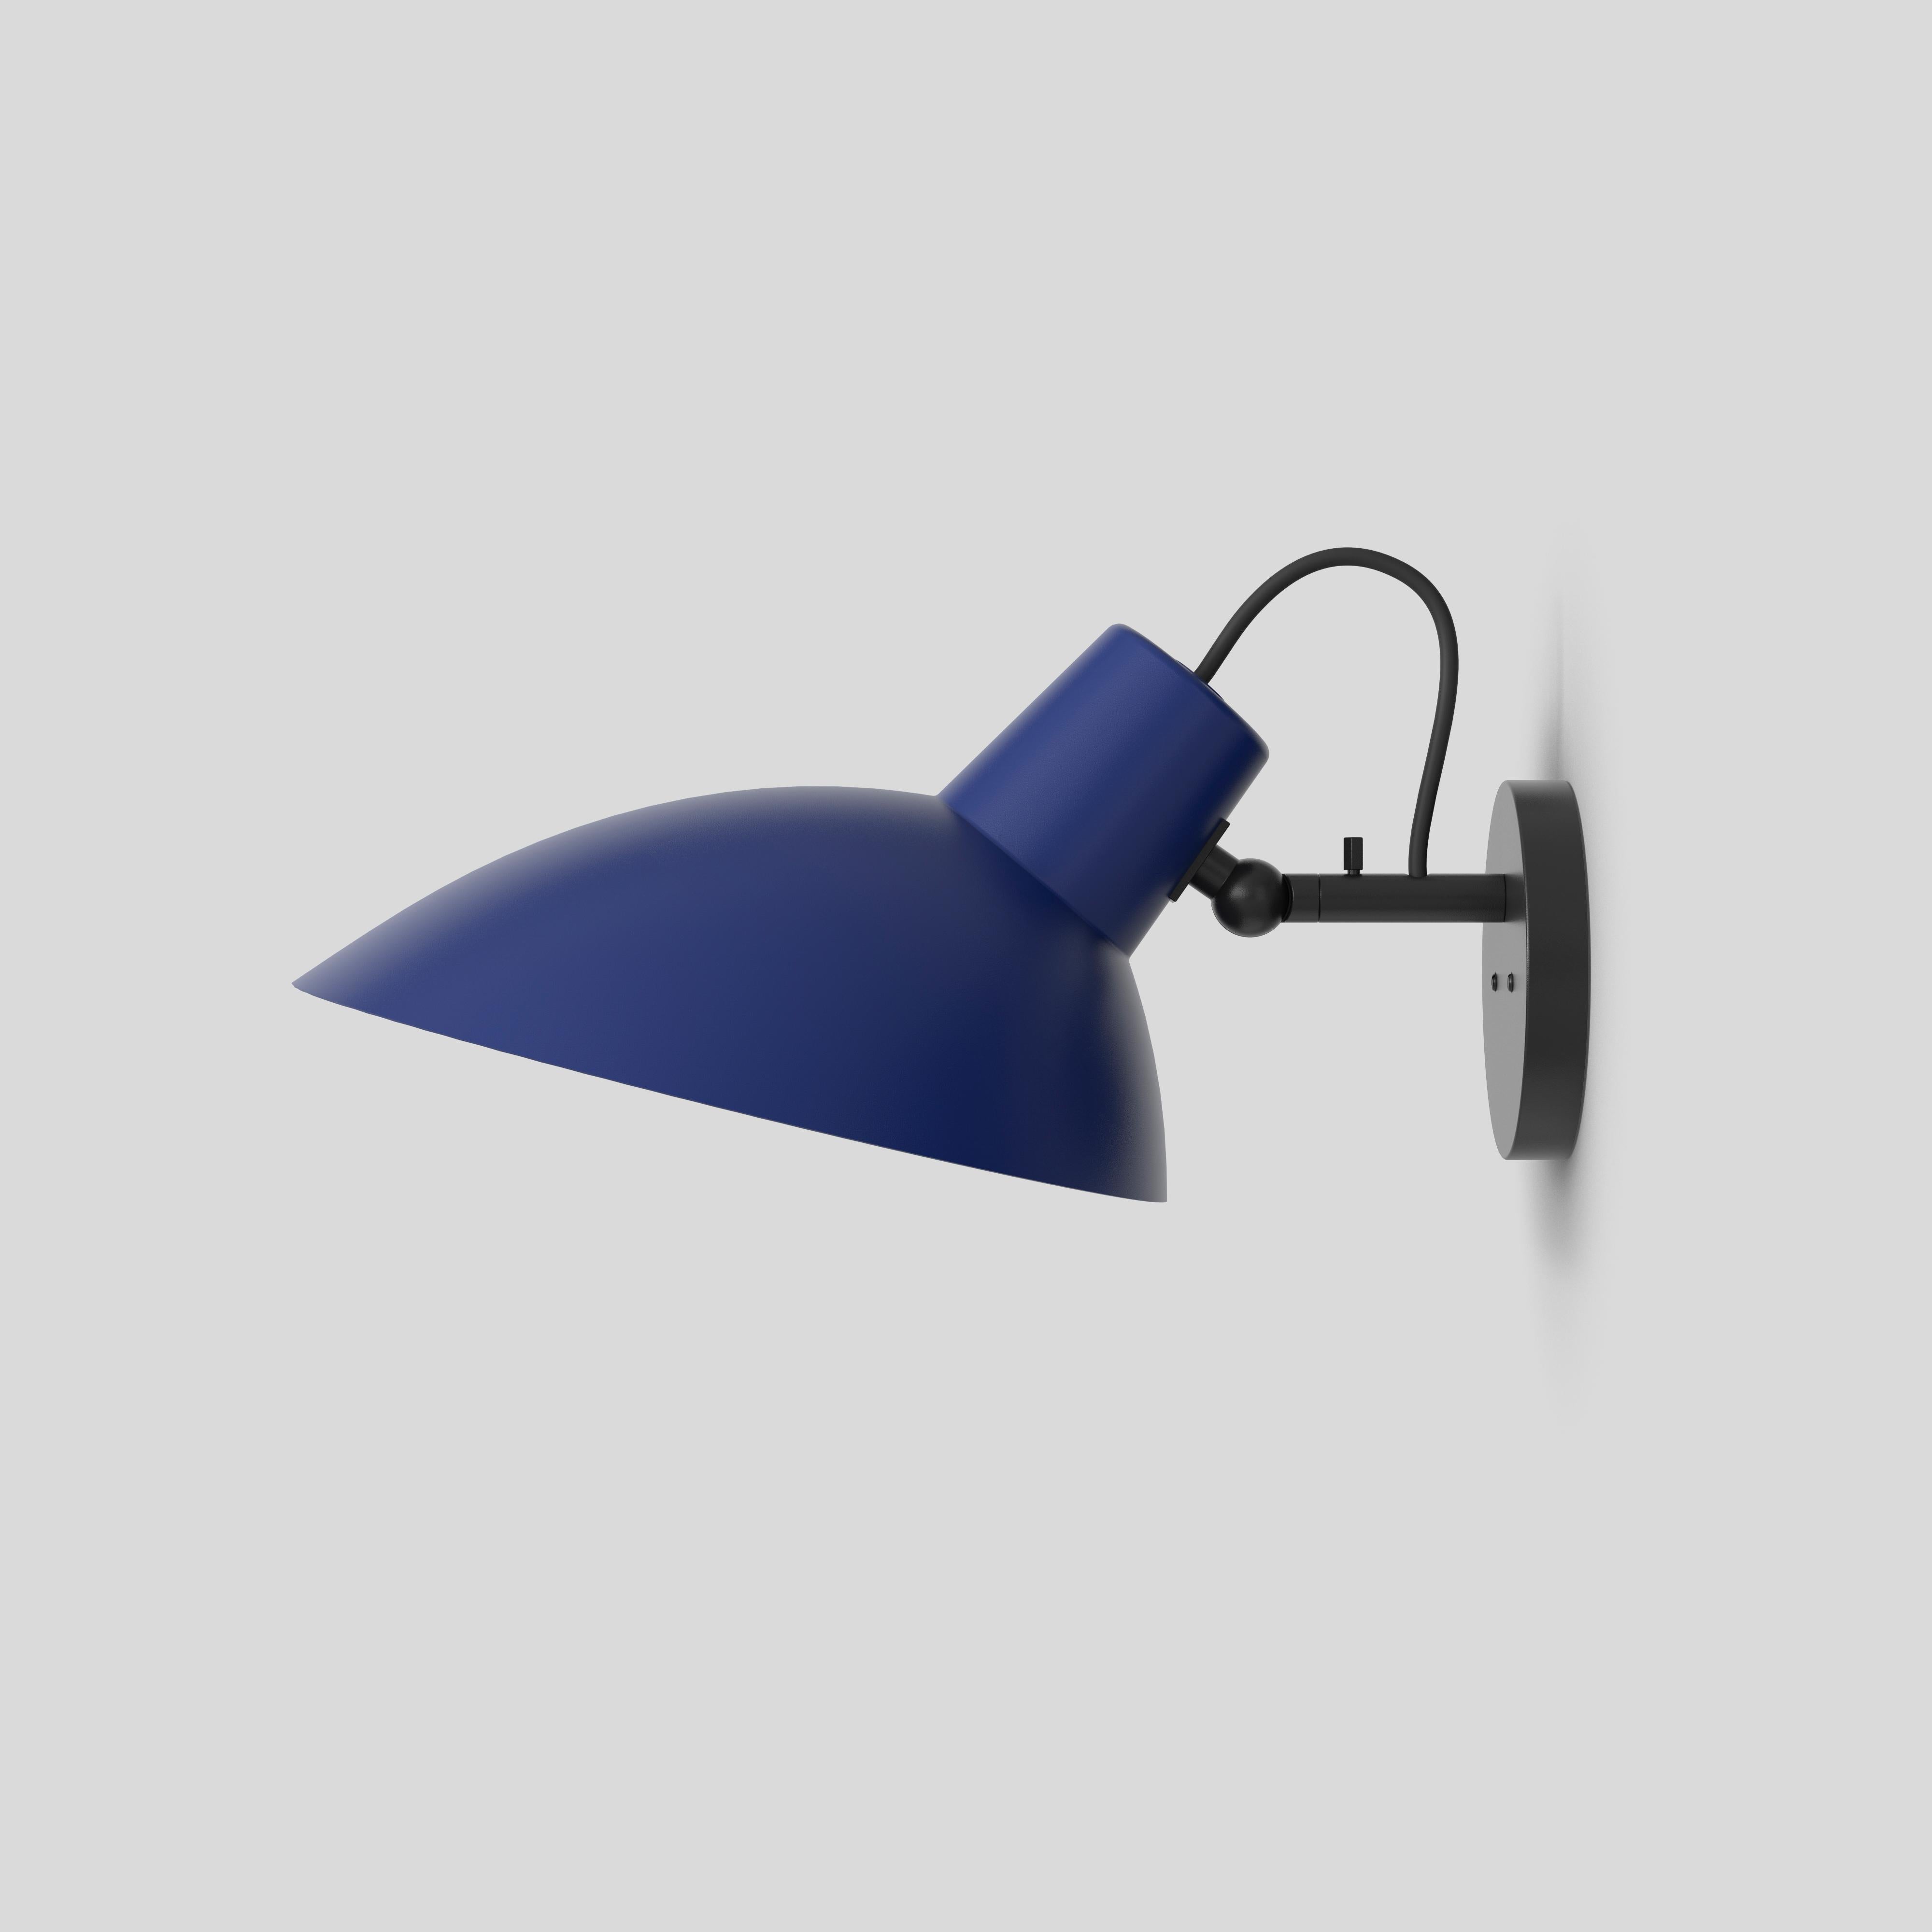 VV Cinquanta wall lamp
Design by Vittoriano Viganò
This version is with blue lacquered reflector and black mount.

The VV Cinquanta features an elegant and versatile posable direct light source that can swivel and tilt. The wall model is mounted on